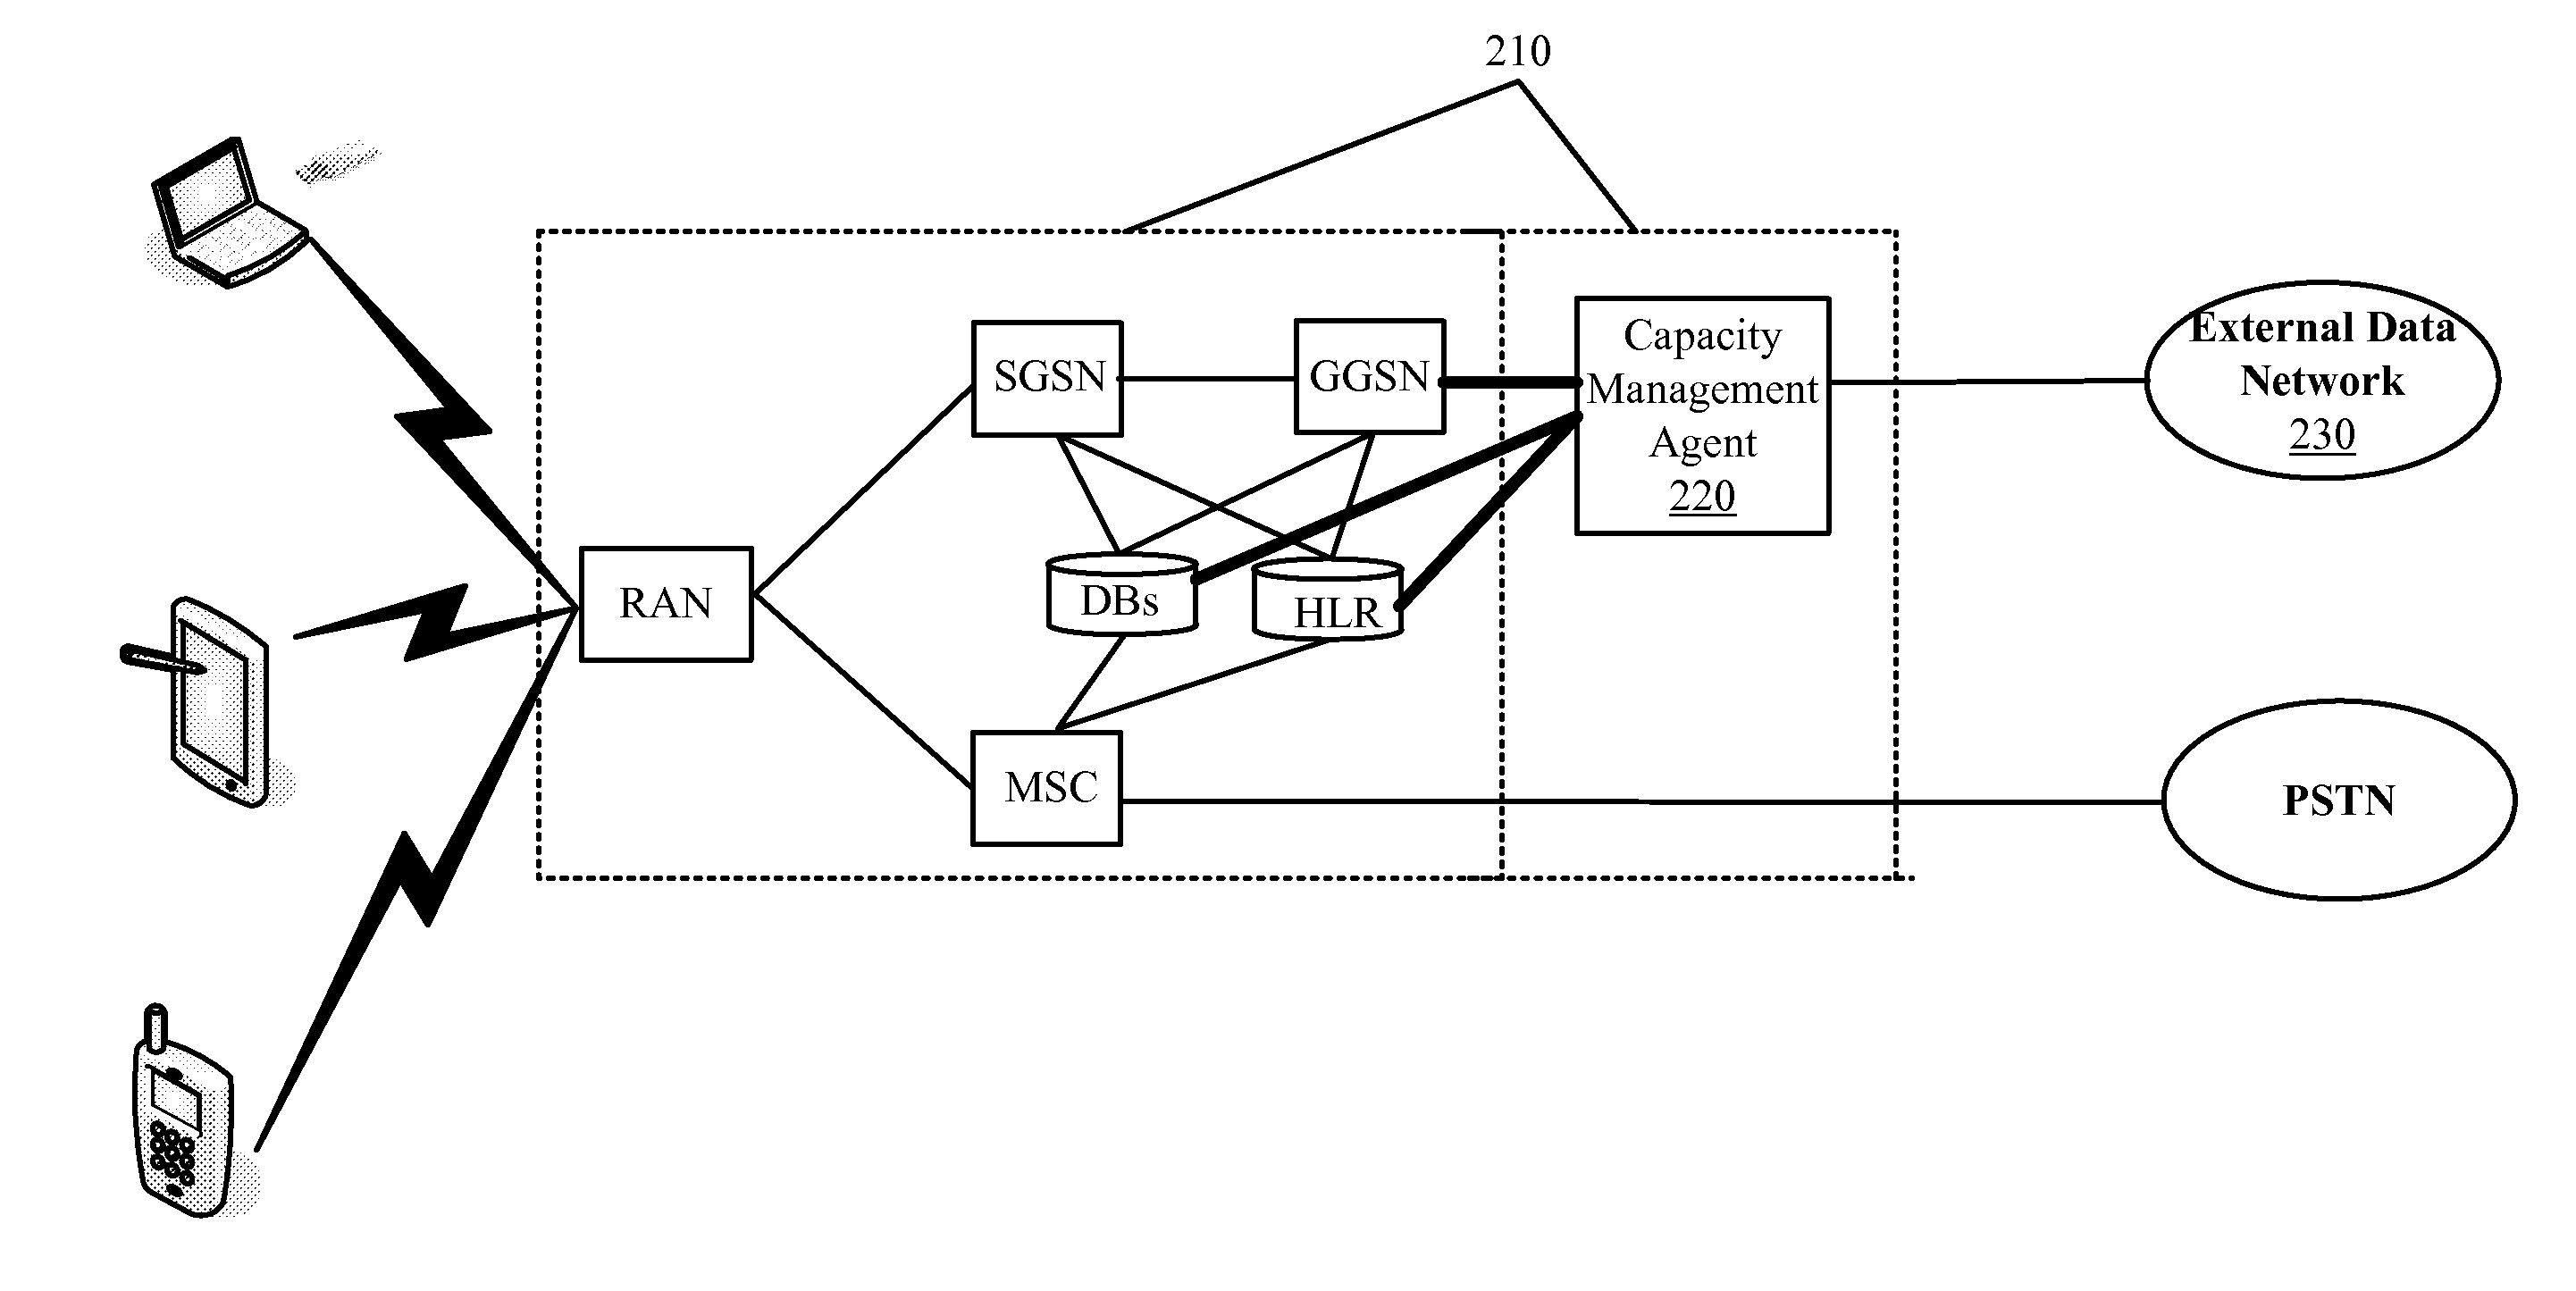 Request Modification for Transparent Capacity Management in a Carrier Network